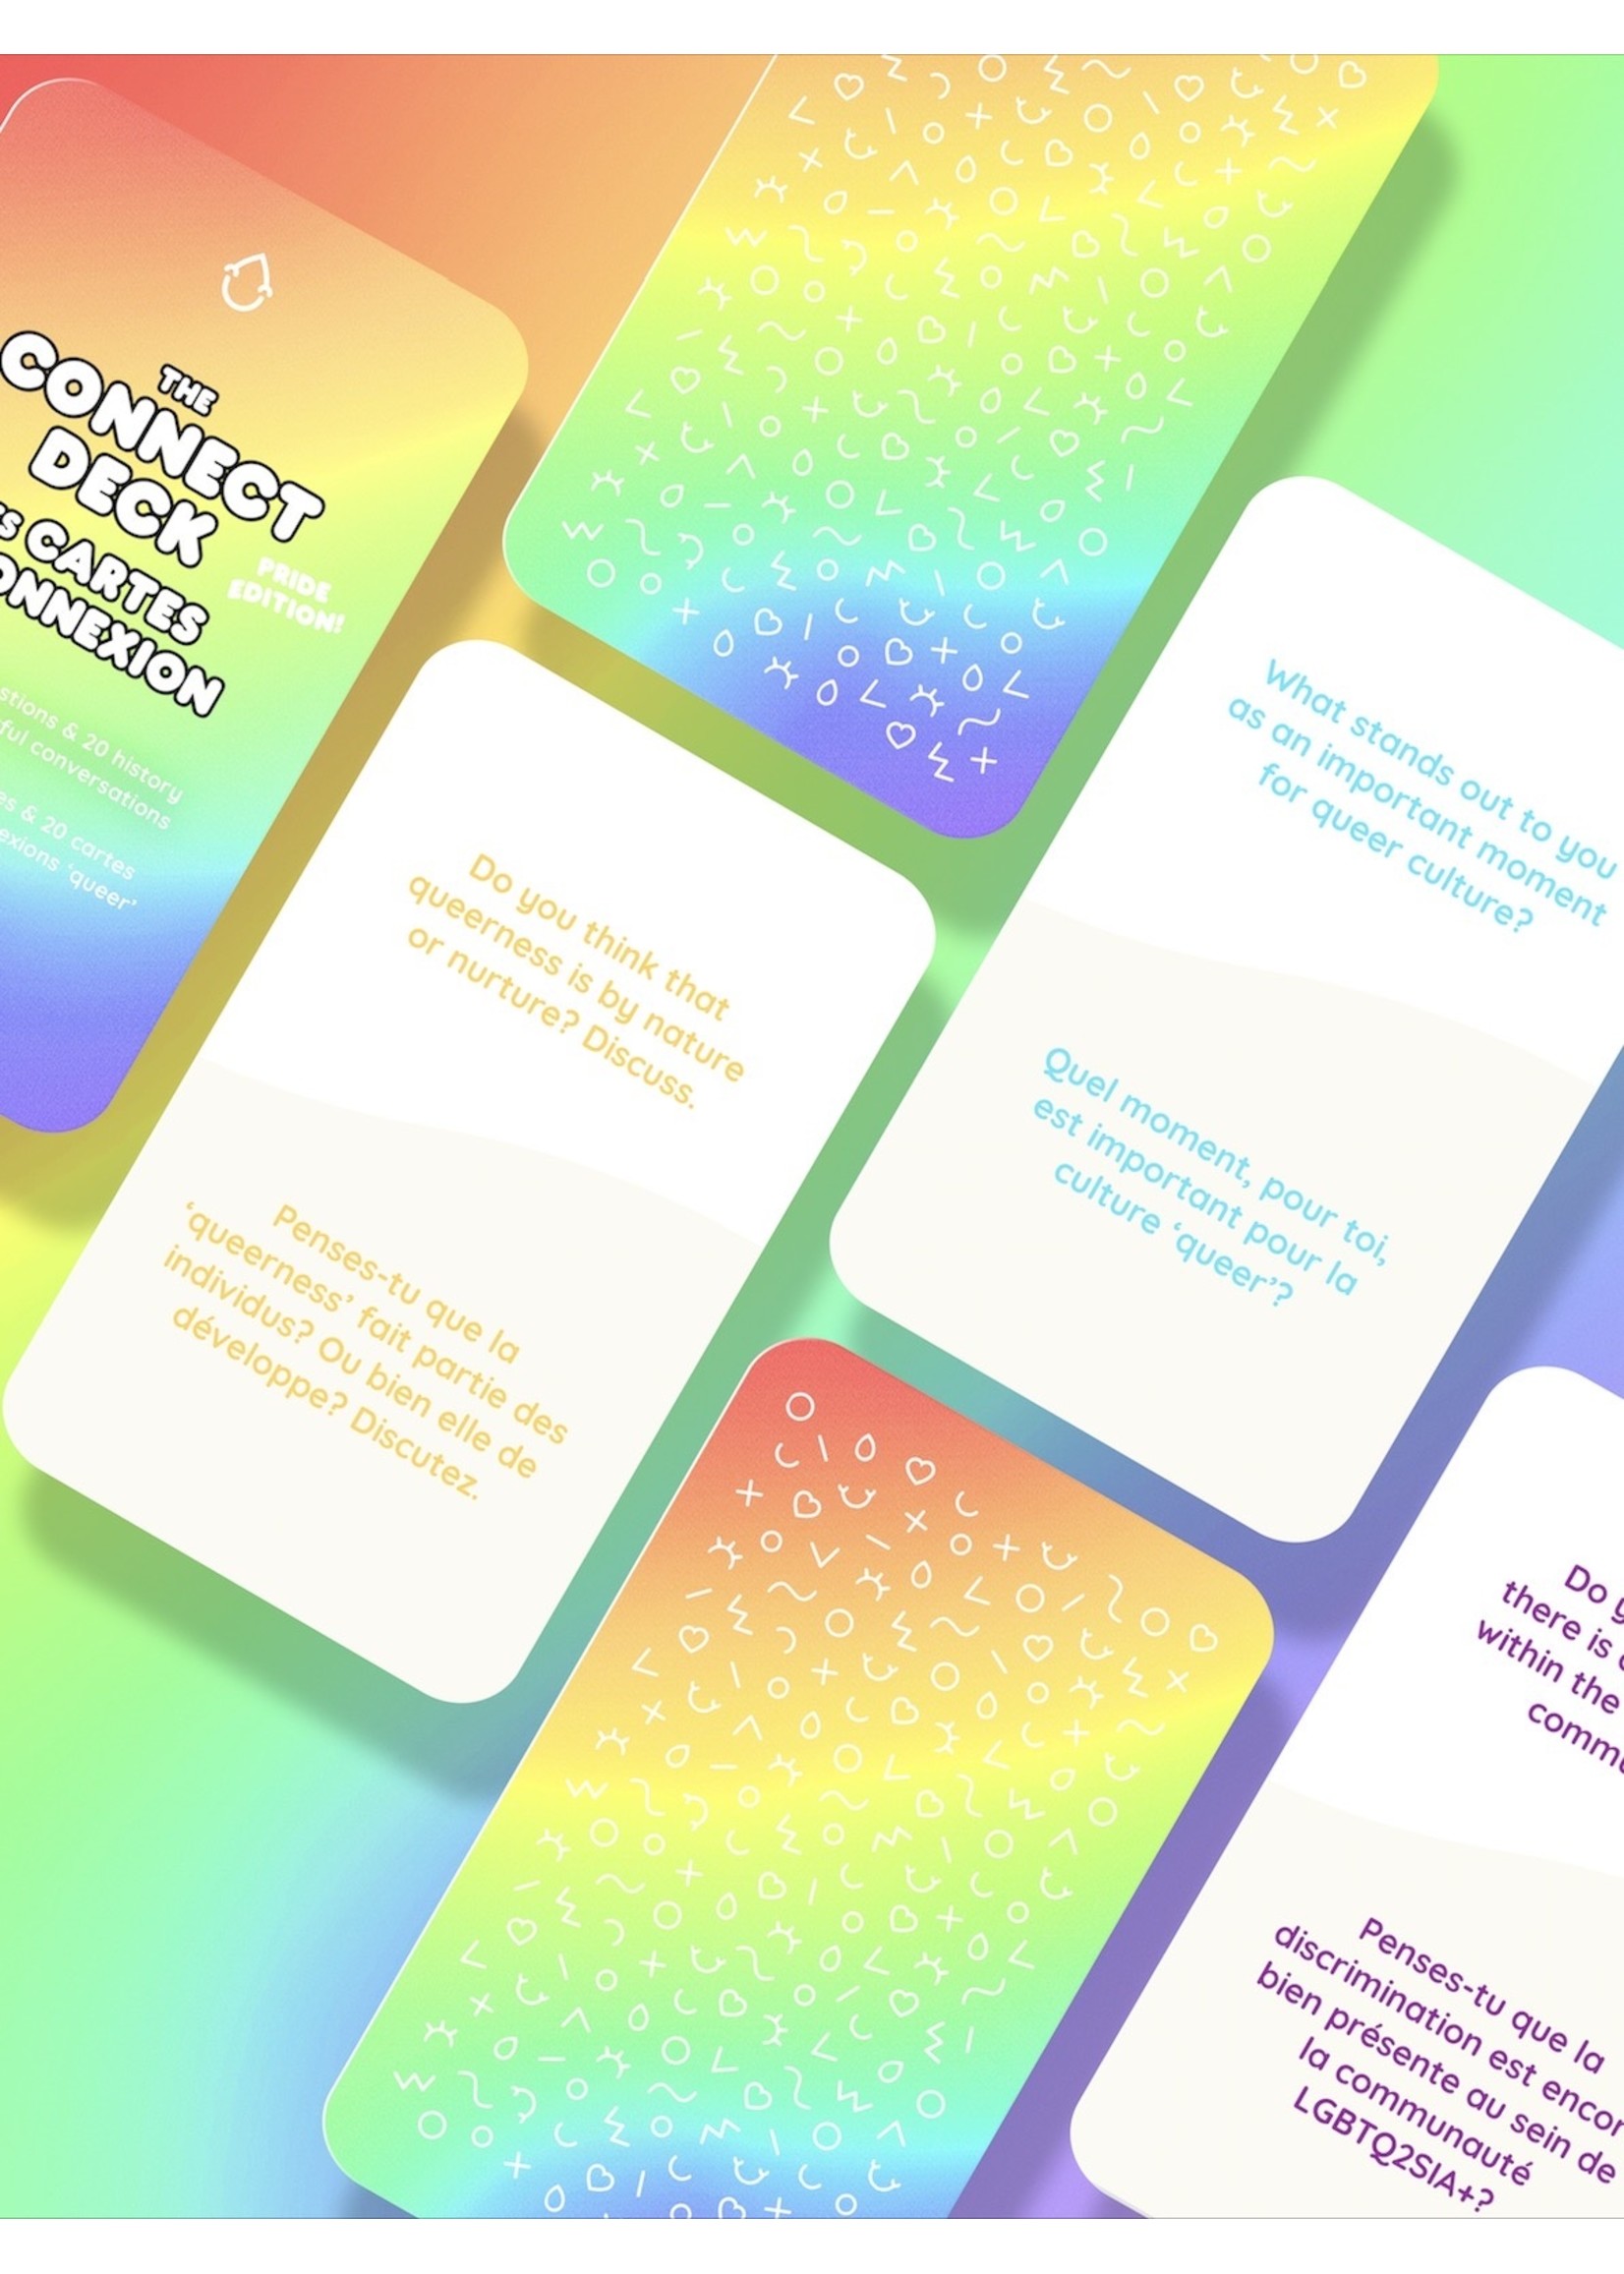 Happy Tears Connect deck "Pride Edition" by Happy Tears